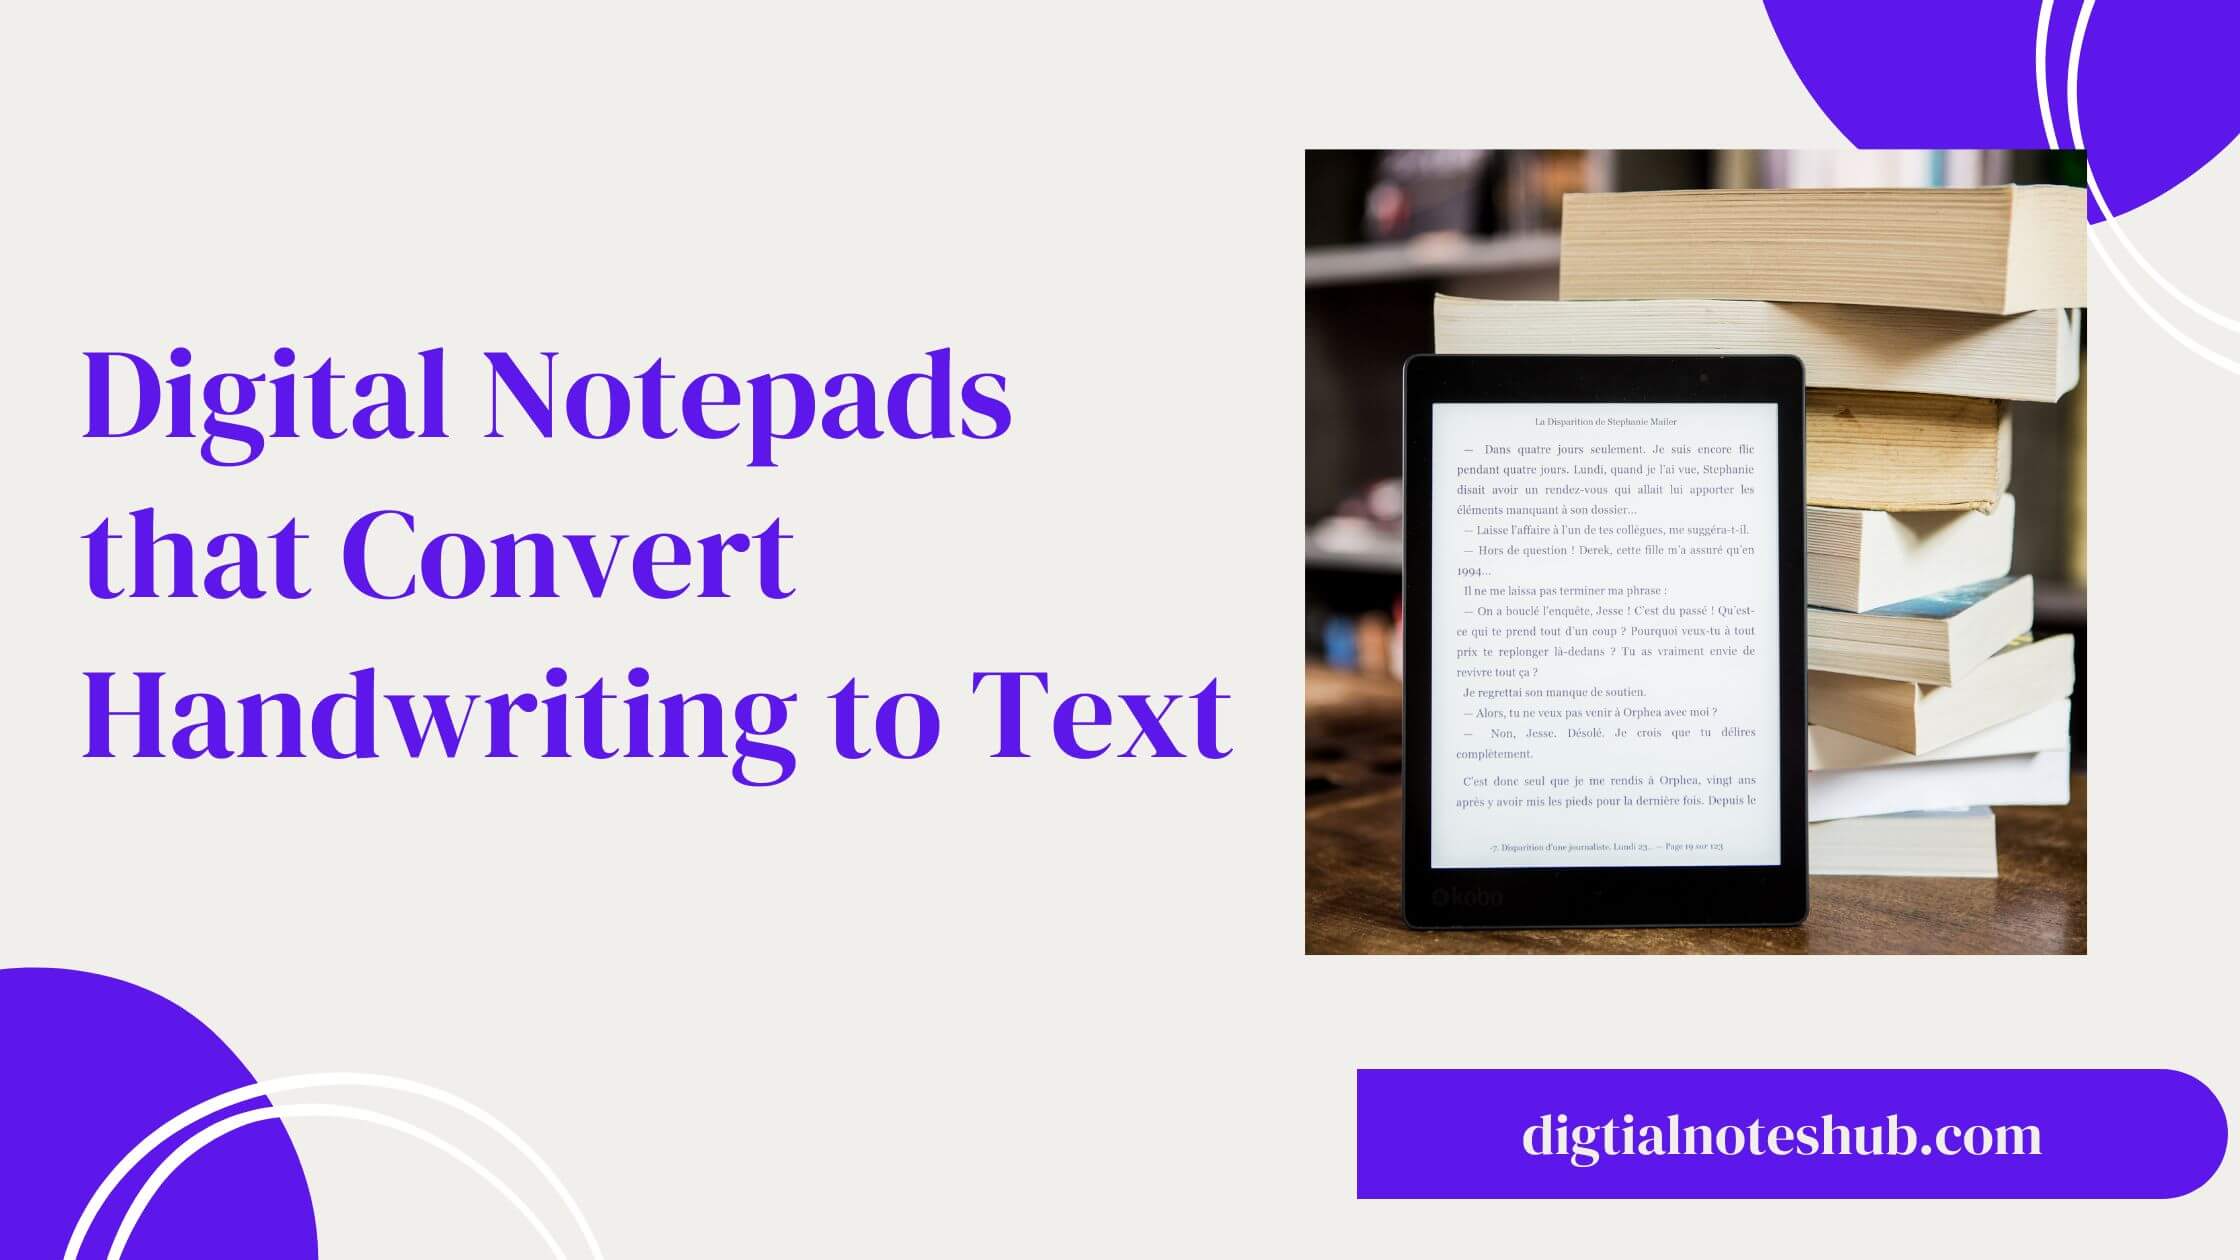 Digital notepad that converts handwriting to text